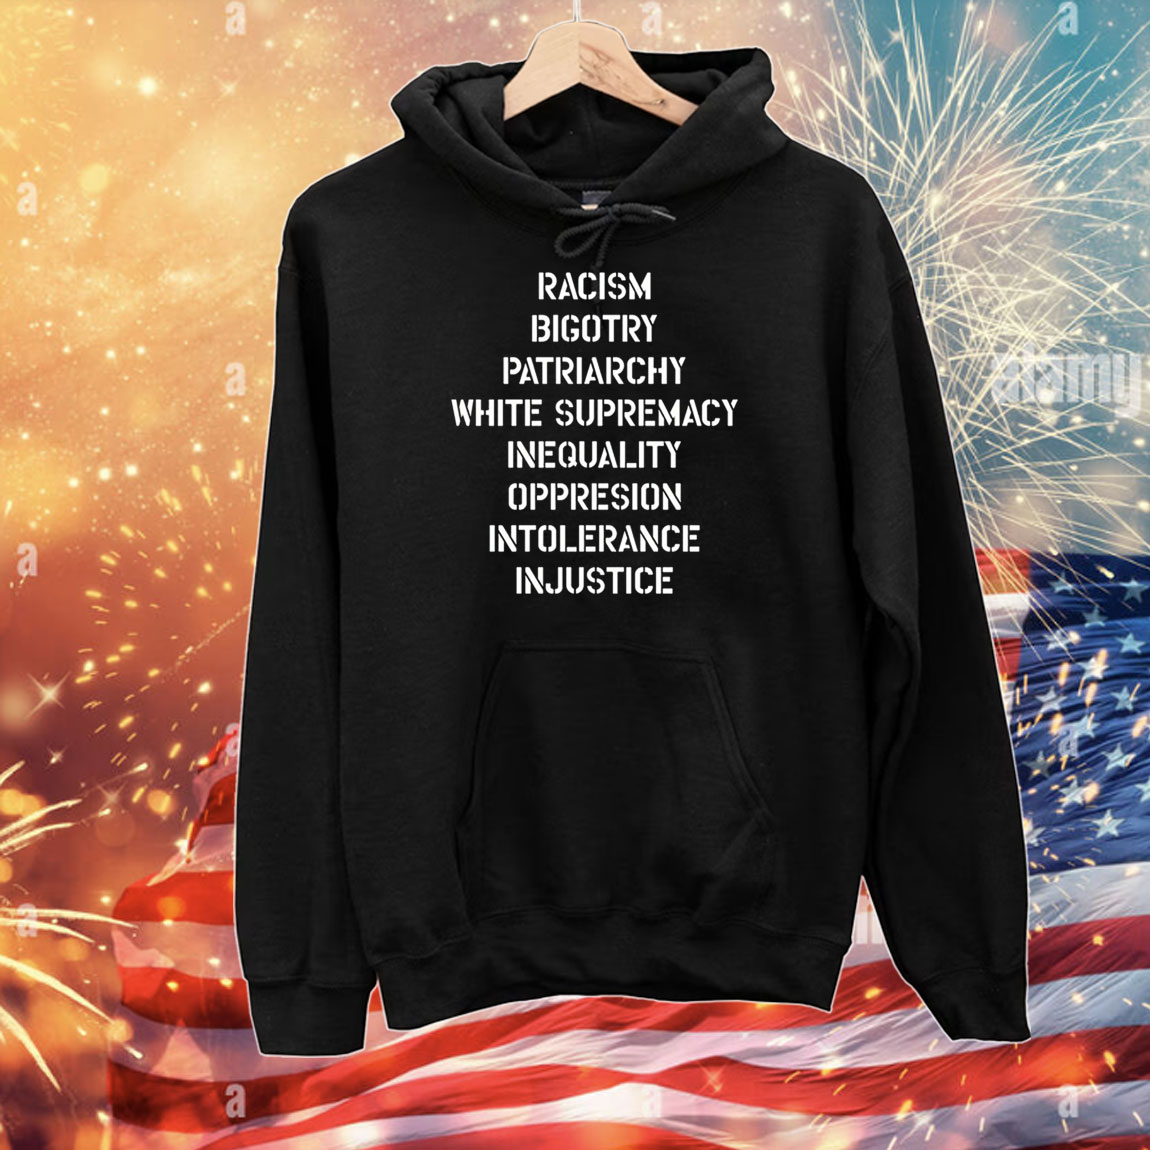 Hasan Piker Racism Bigotry Patriarchy White Supremacy Inequality Oppression Intolerance Injustice T-Shirts